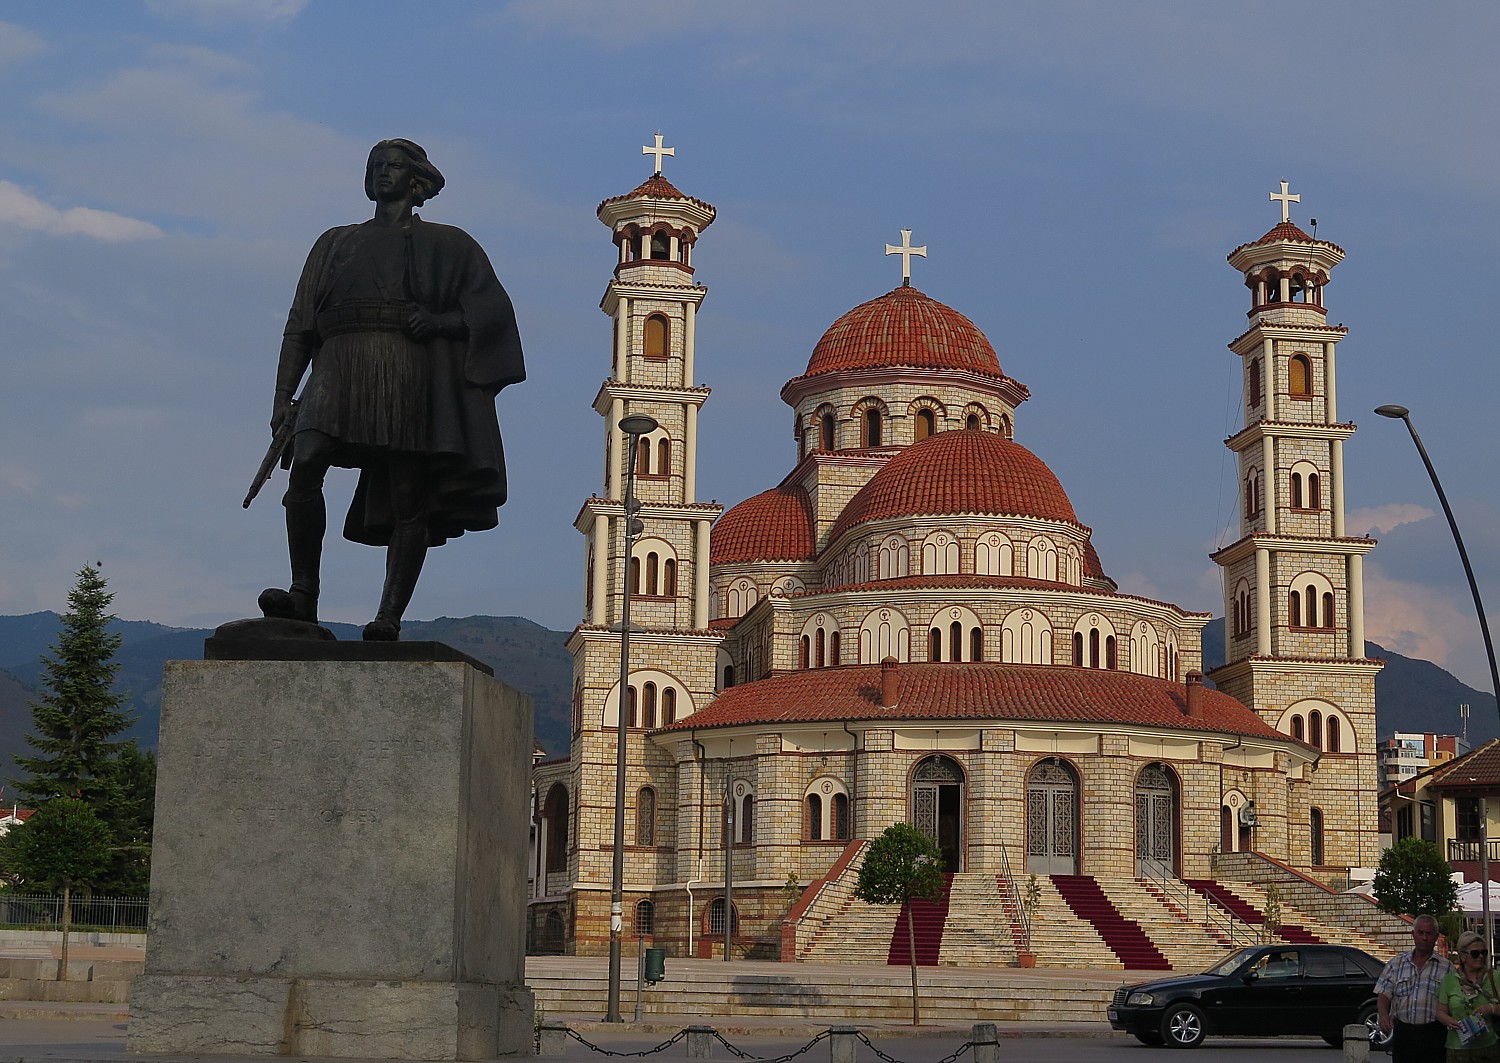 “National Hero” Monument with Resurrection Orthodox Cathedral in the heart of Korca 247 © 2016 Karen Rubin/goingplacesfarandnear.com